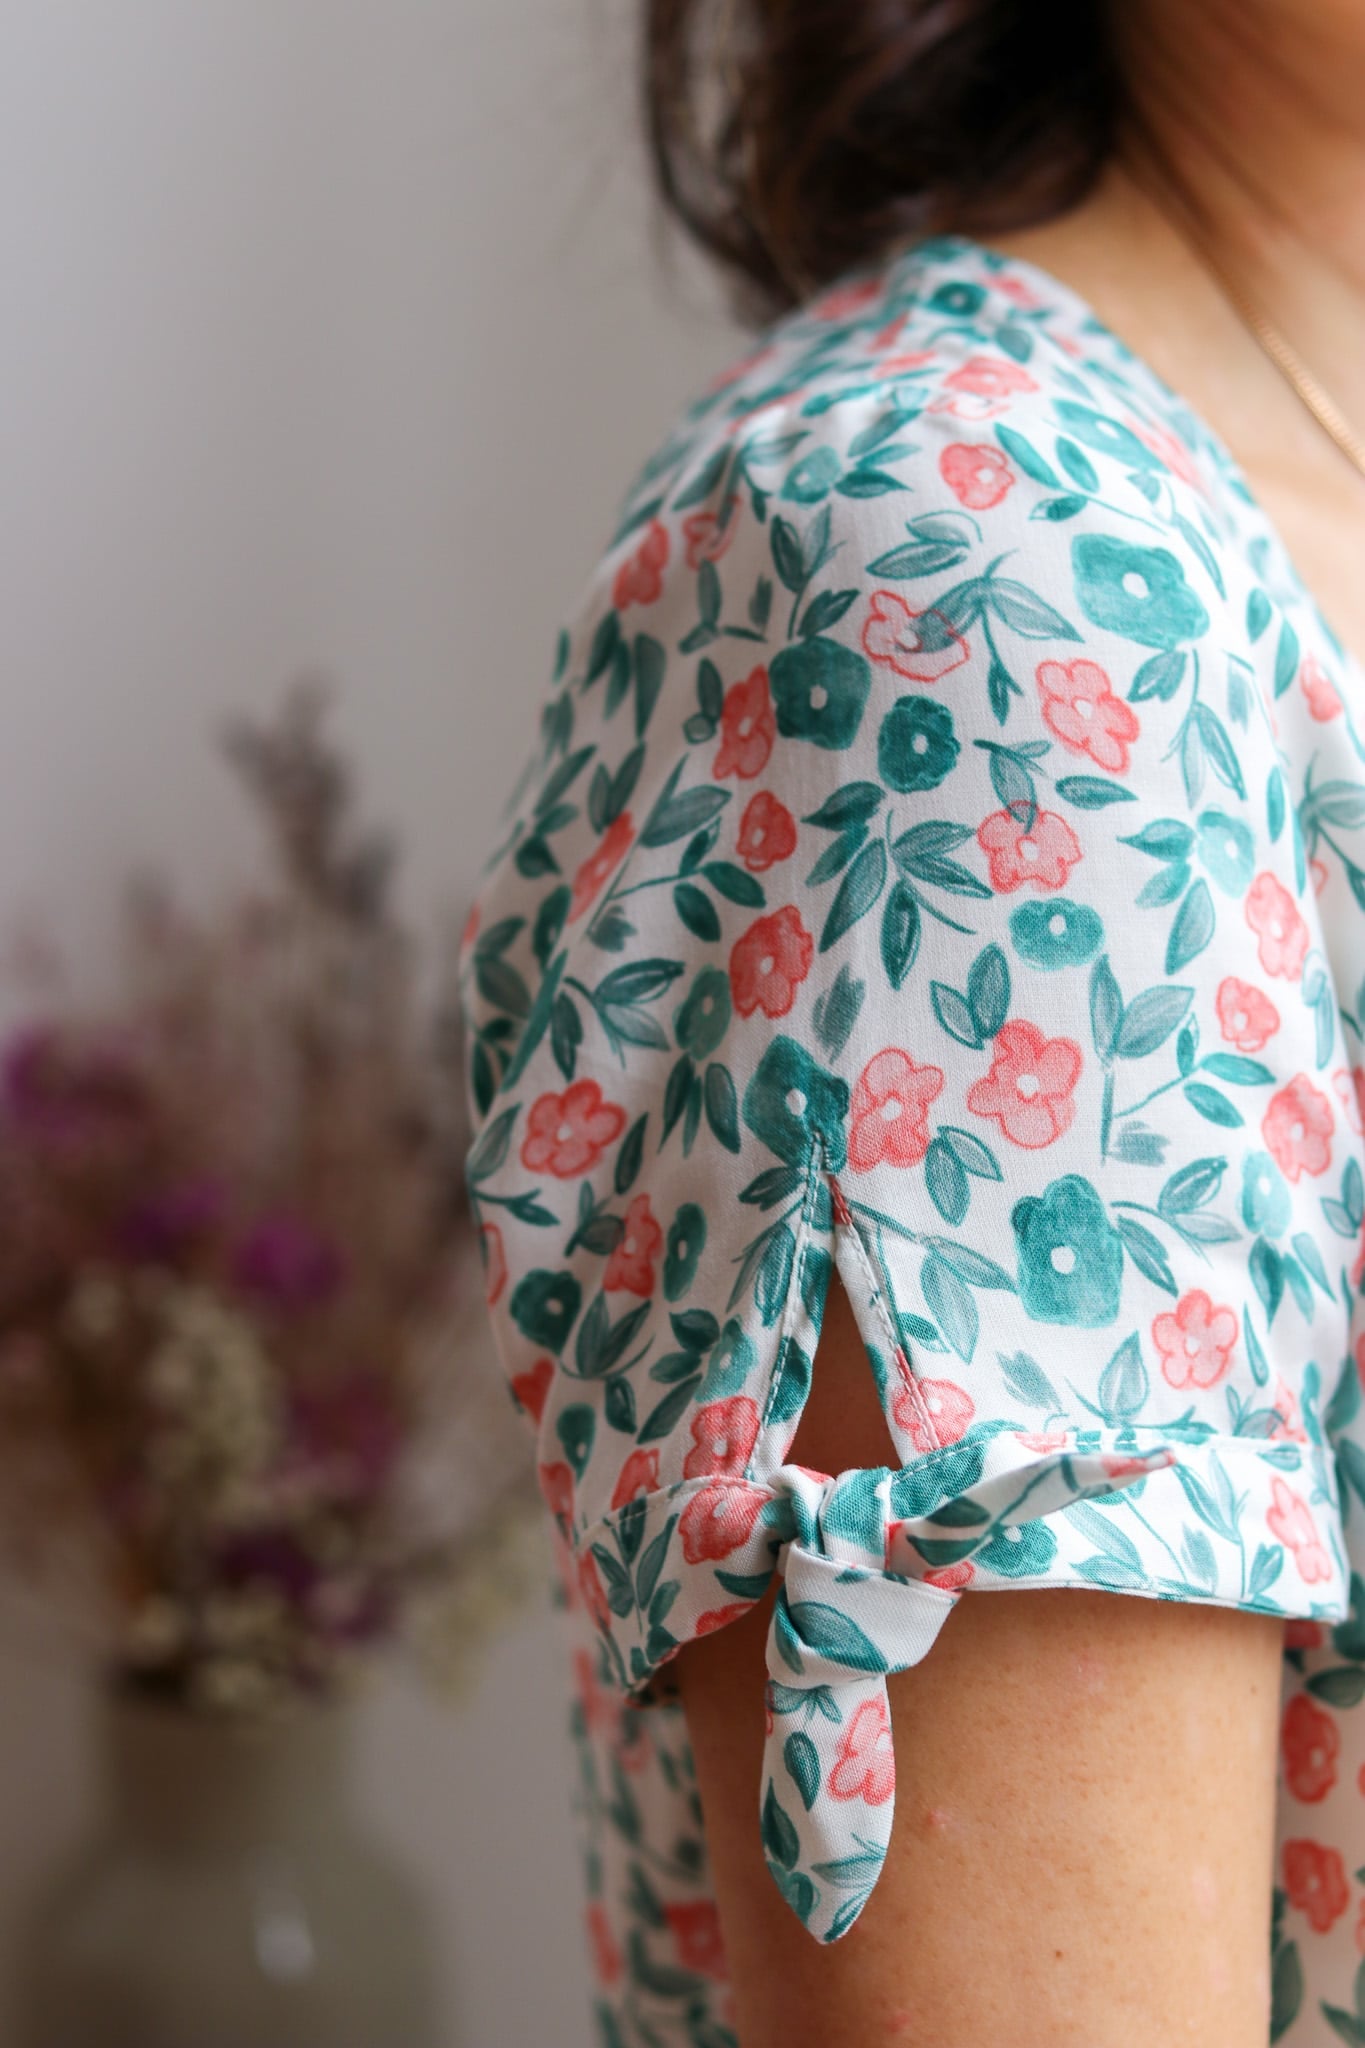 Lise Tailor - Easy Peasy Top Sewing Pattern